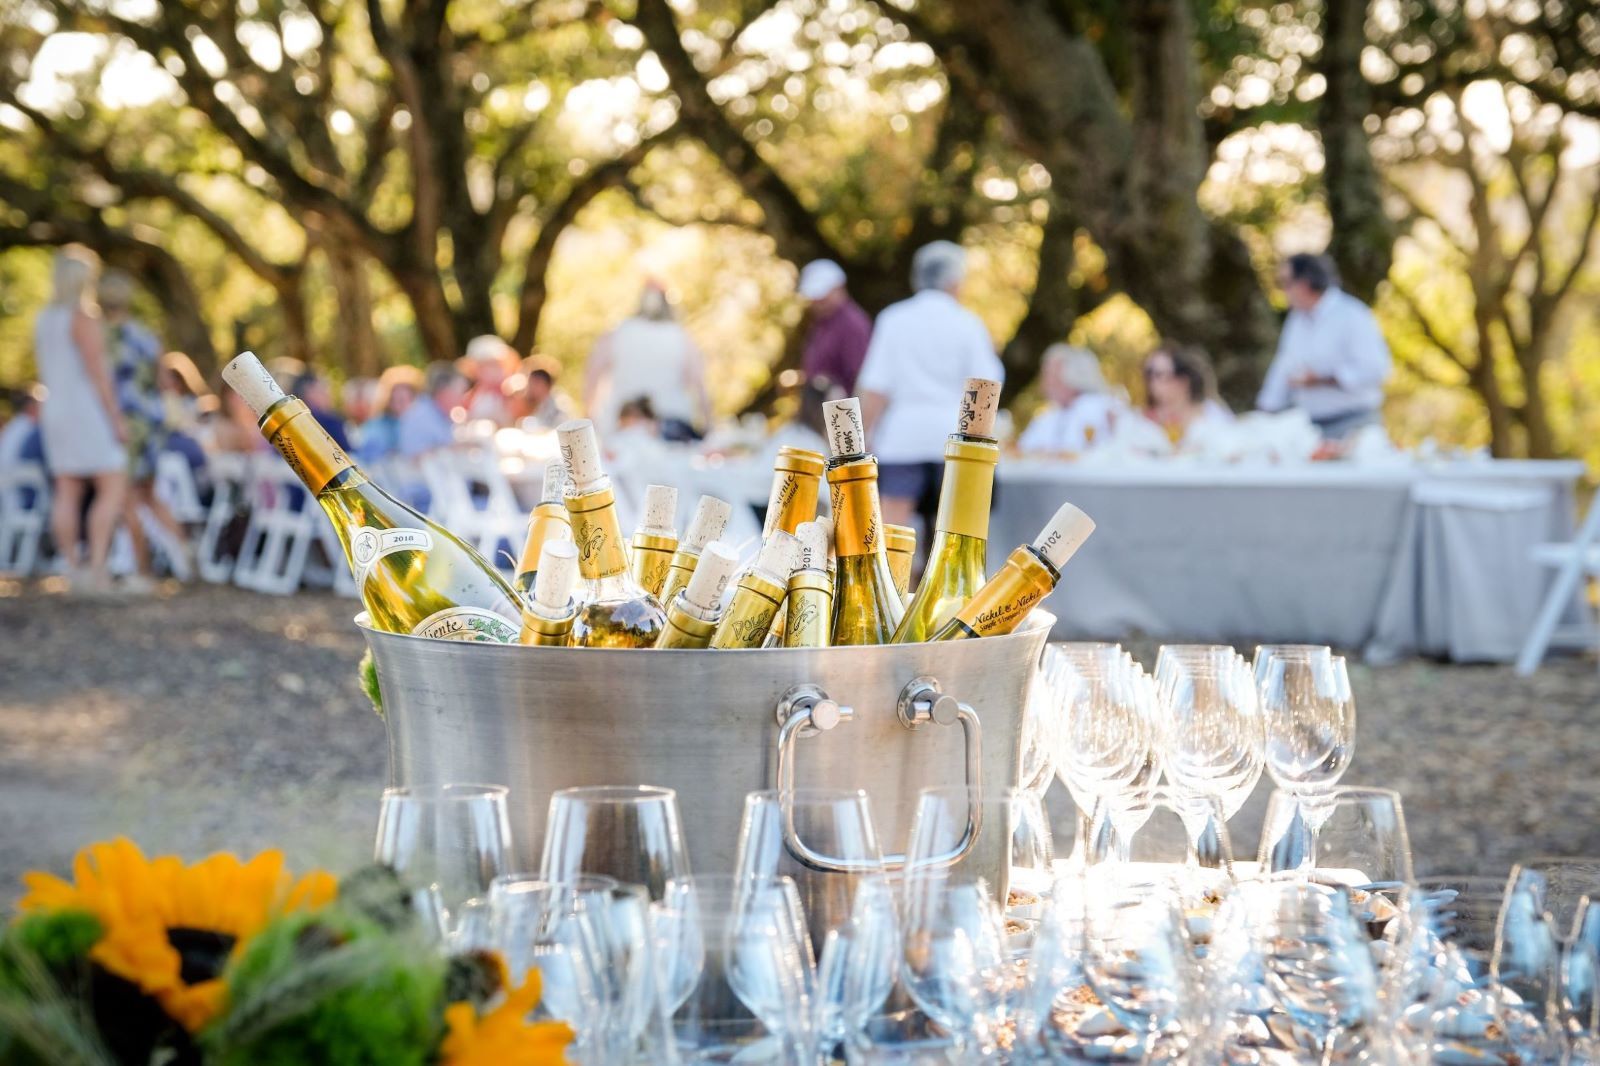 The Wedding Wines You'll Love to Serve, Gift and Celebrate